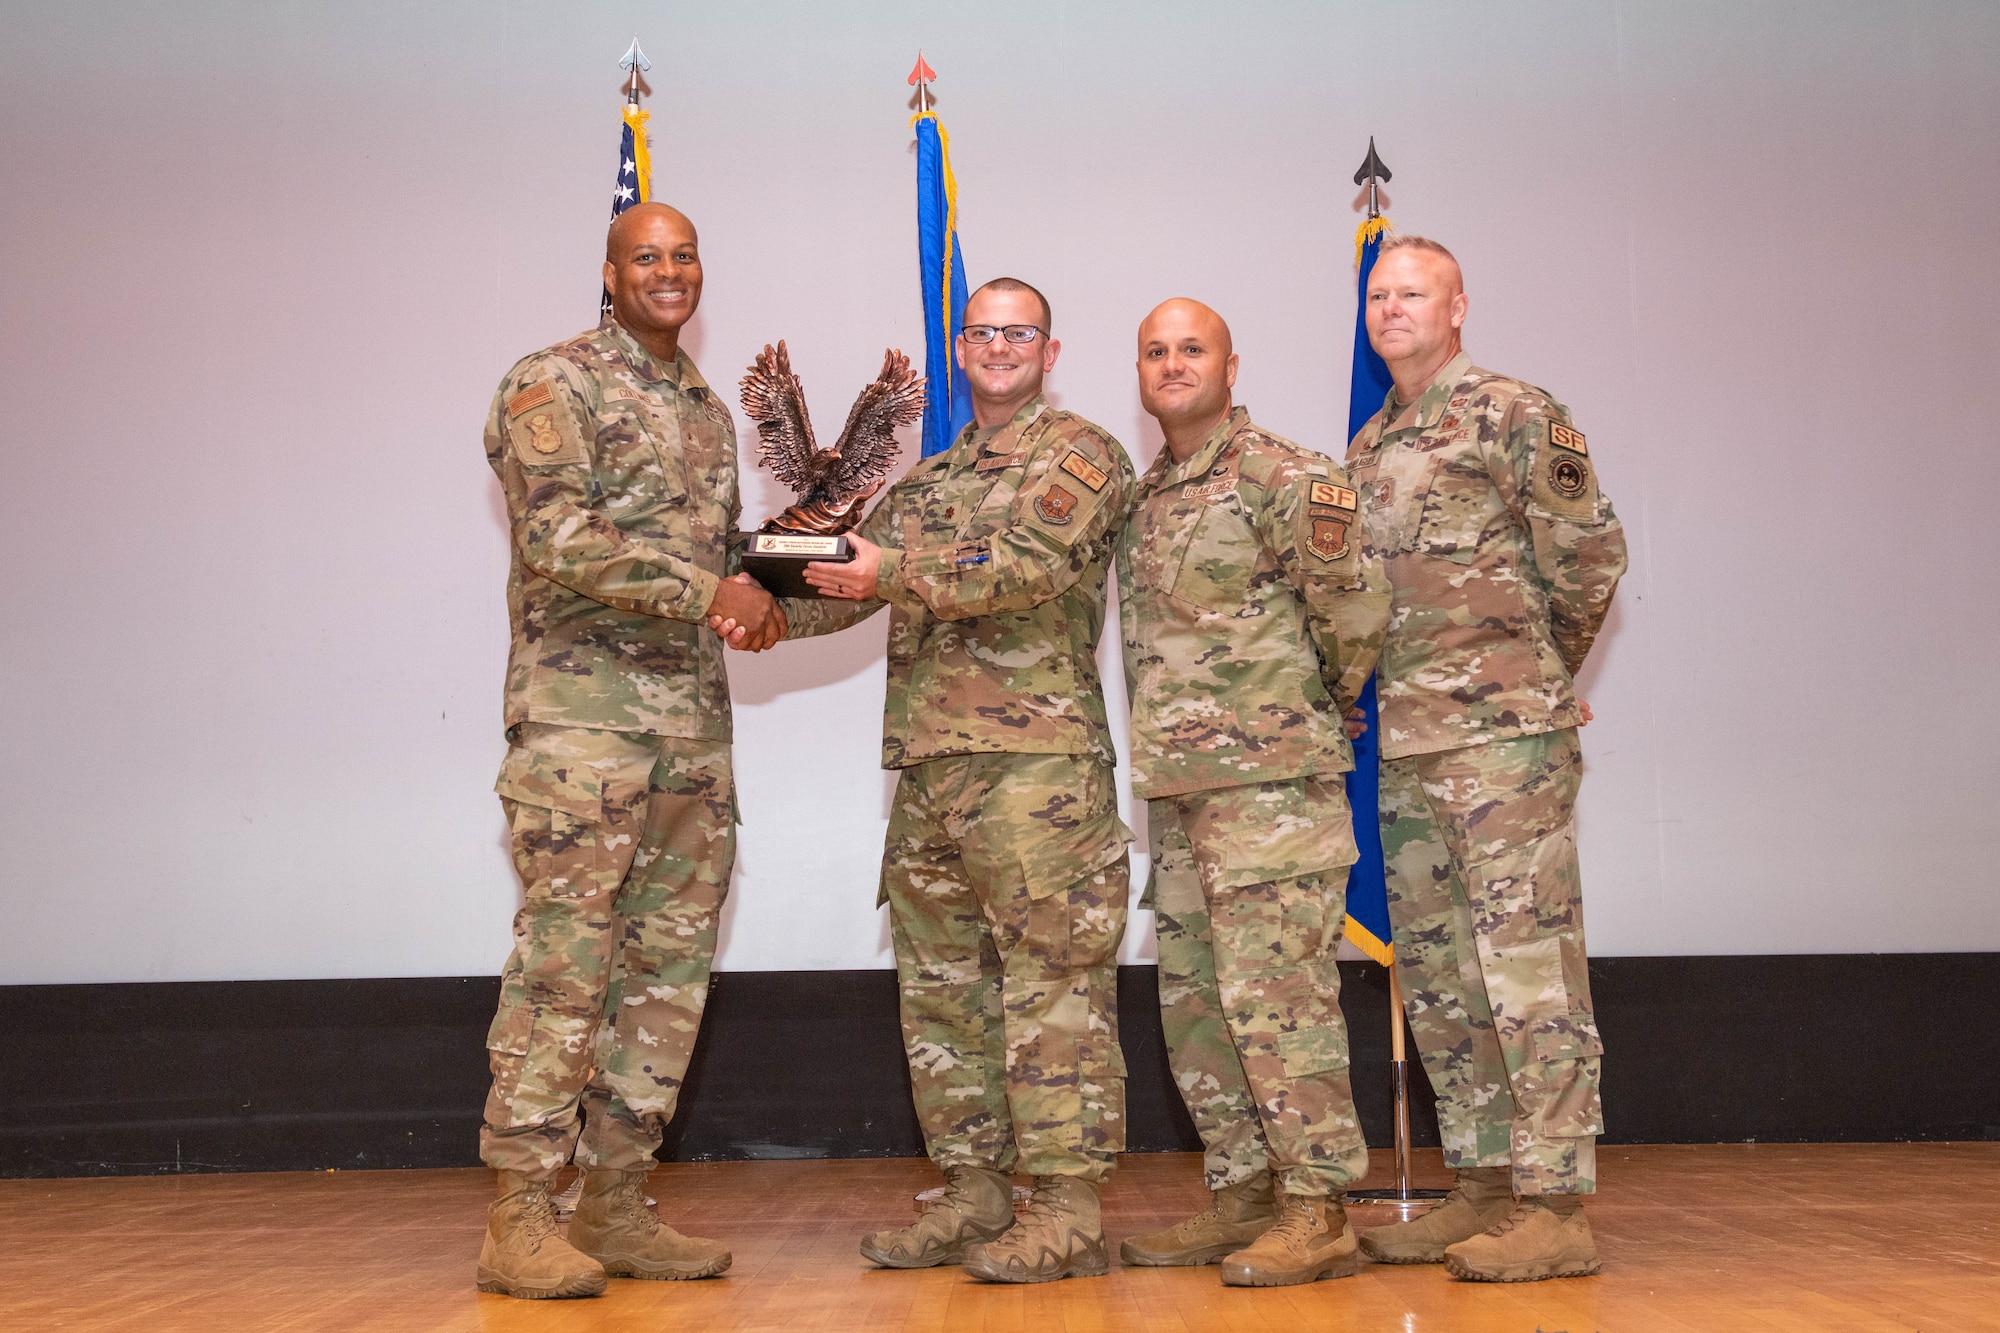 Brig. Gen. Roy W. Collins, Director of Security Forces, deputy chief of staff for logistics, engineering and force protection, headquarters U.S. Air Force and Chief Master Sgt. Donald Gallagher, 20th Security Forces career field manager present the 2021 Air Force Best Medium Security Forces Unit award to Maj. Rudy McIntyre, 28th Security Forces Squadron commander at Ellsworth Air Force Base, S.D., July 27, 2022.